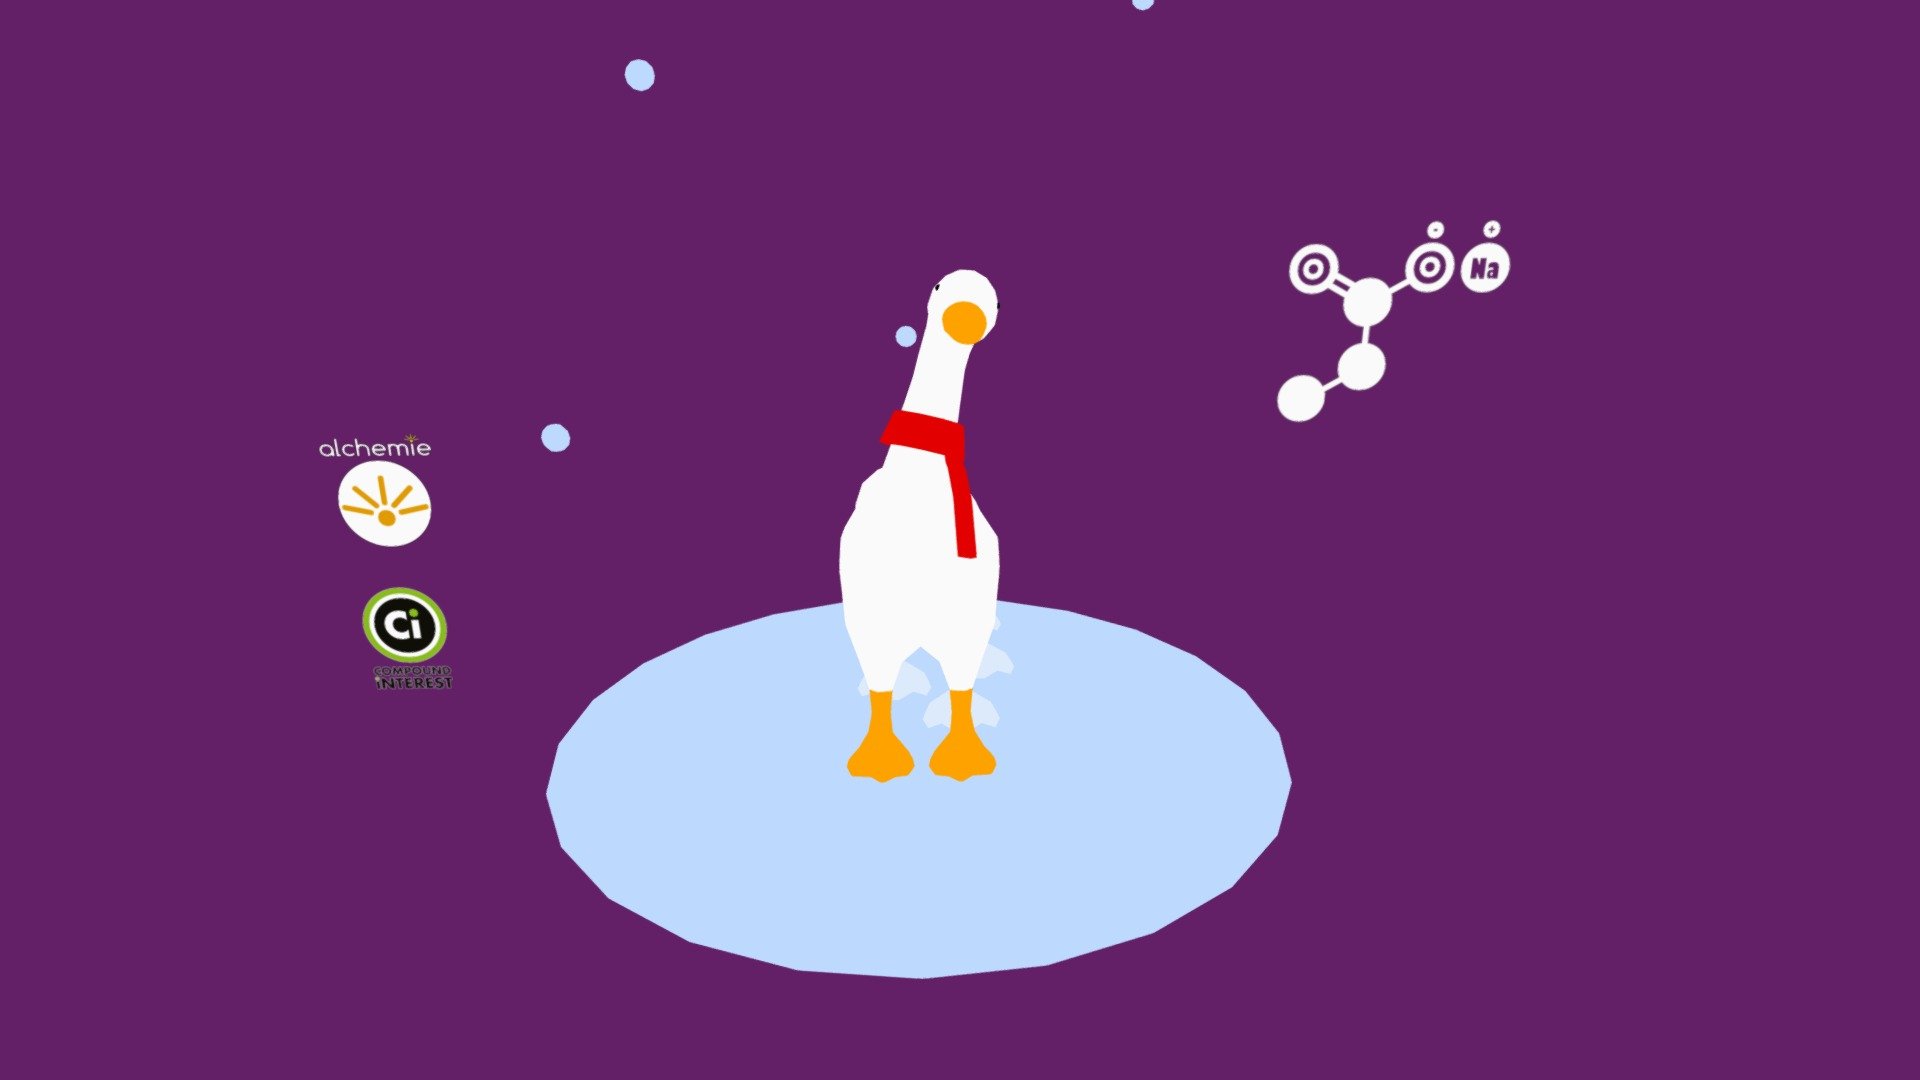 Check out the chemistry behind fake snow that this little goose is enjoying!

See more here:
https://www.compoundchem.com/2017advent/2017advent7/

Find more chemistry GIFs here:
https://www.alchem.ie/gifs - Goose and Snow - Compound Interest - Buy Royalty Free 3D model by Elijah Sheffield (@ElijahMSheffield) 3d model